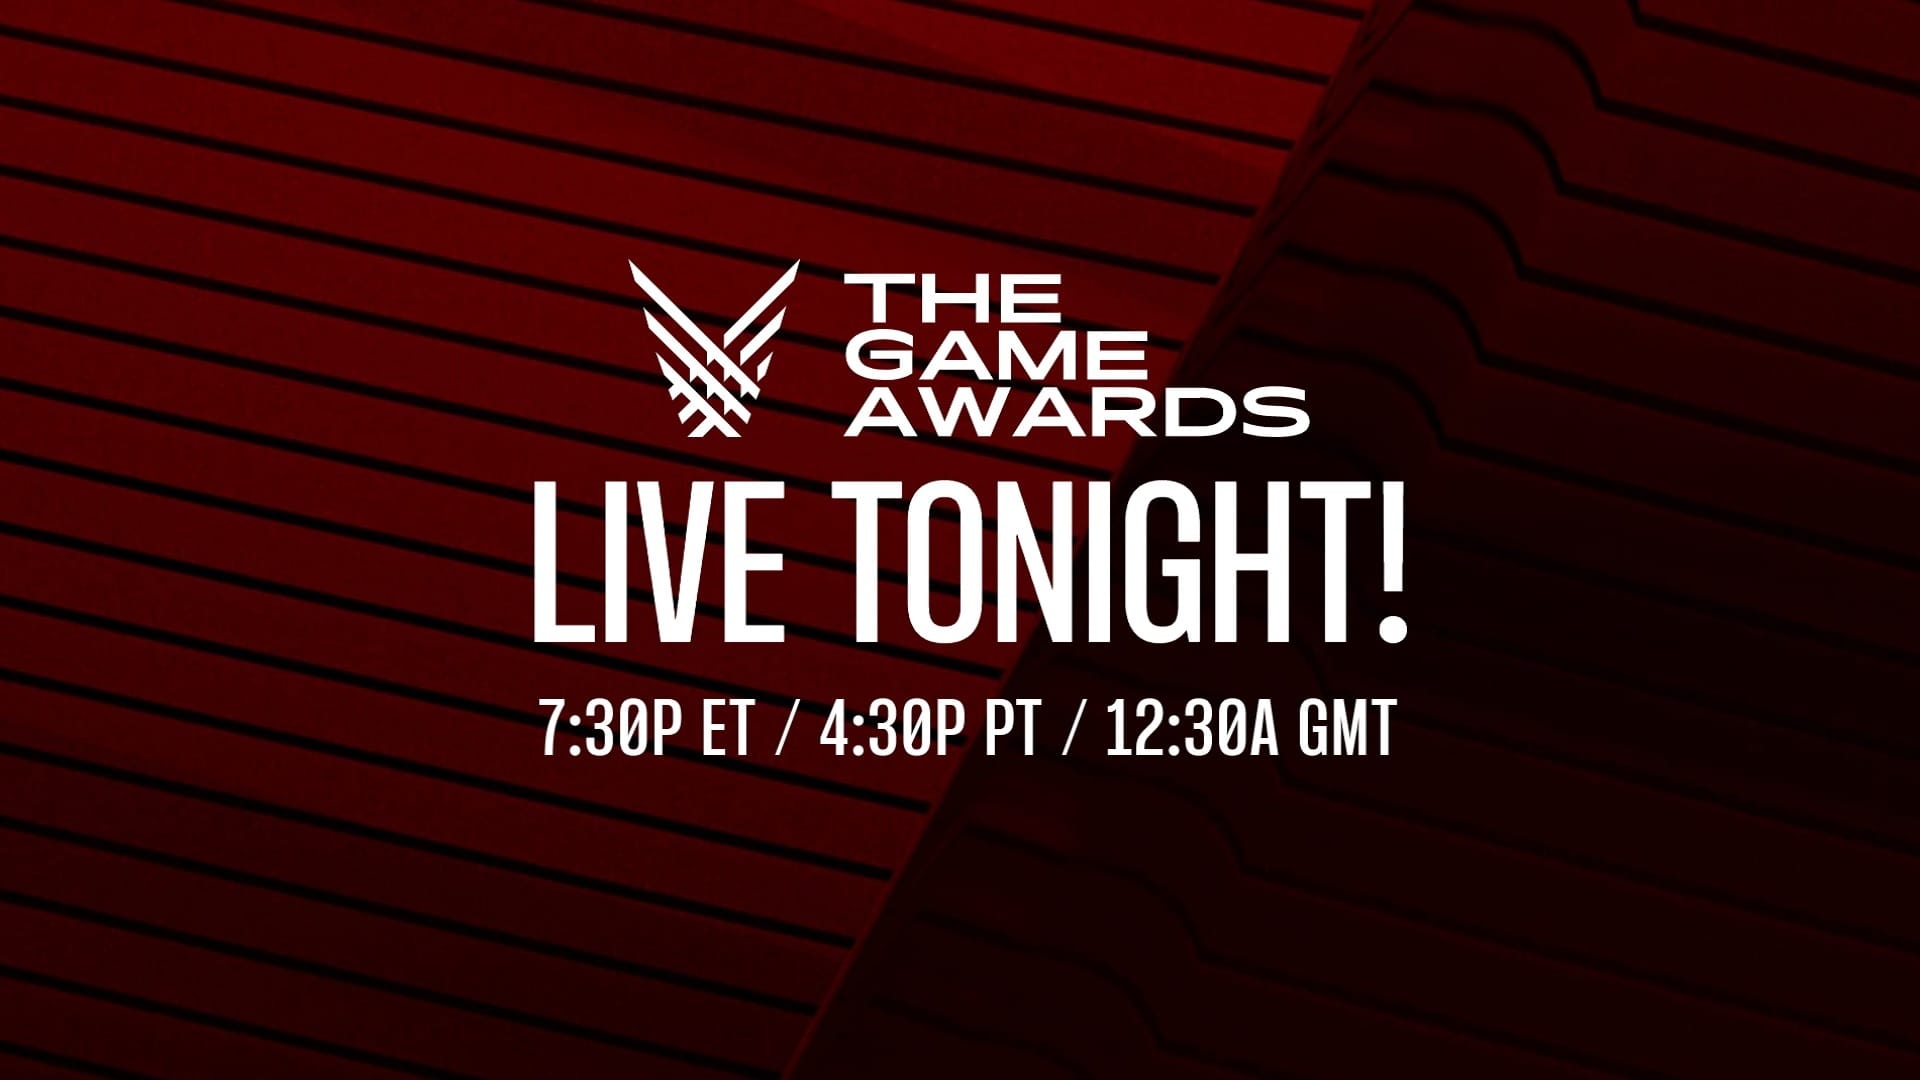 The Game Awards 2022: when, what time and how to see it?